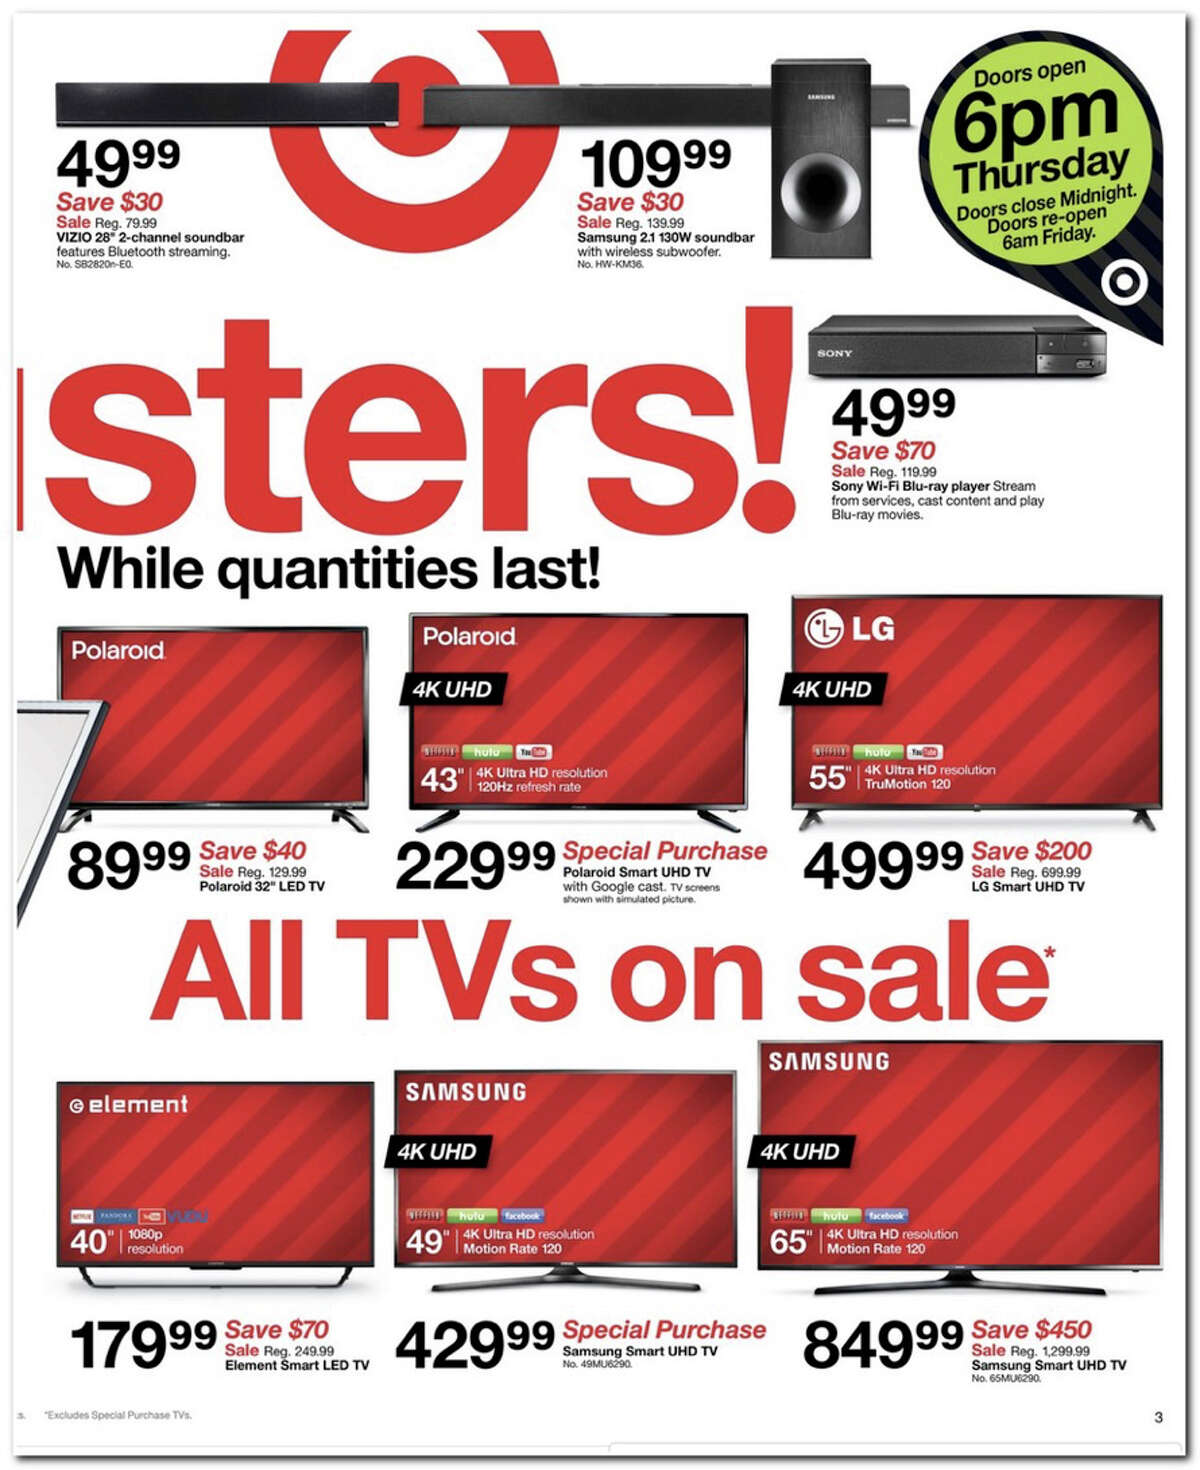 Target has released its 2017 Black Friday Doorbuster ad. Prices and promotion begin on Thursday, Nov. 23 at 6 p.m. and are subject to change based on availability and the retailer's determination.